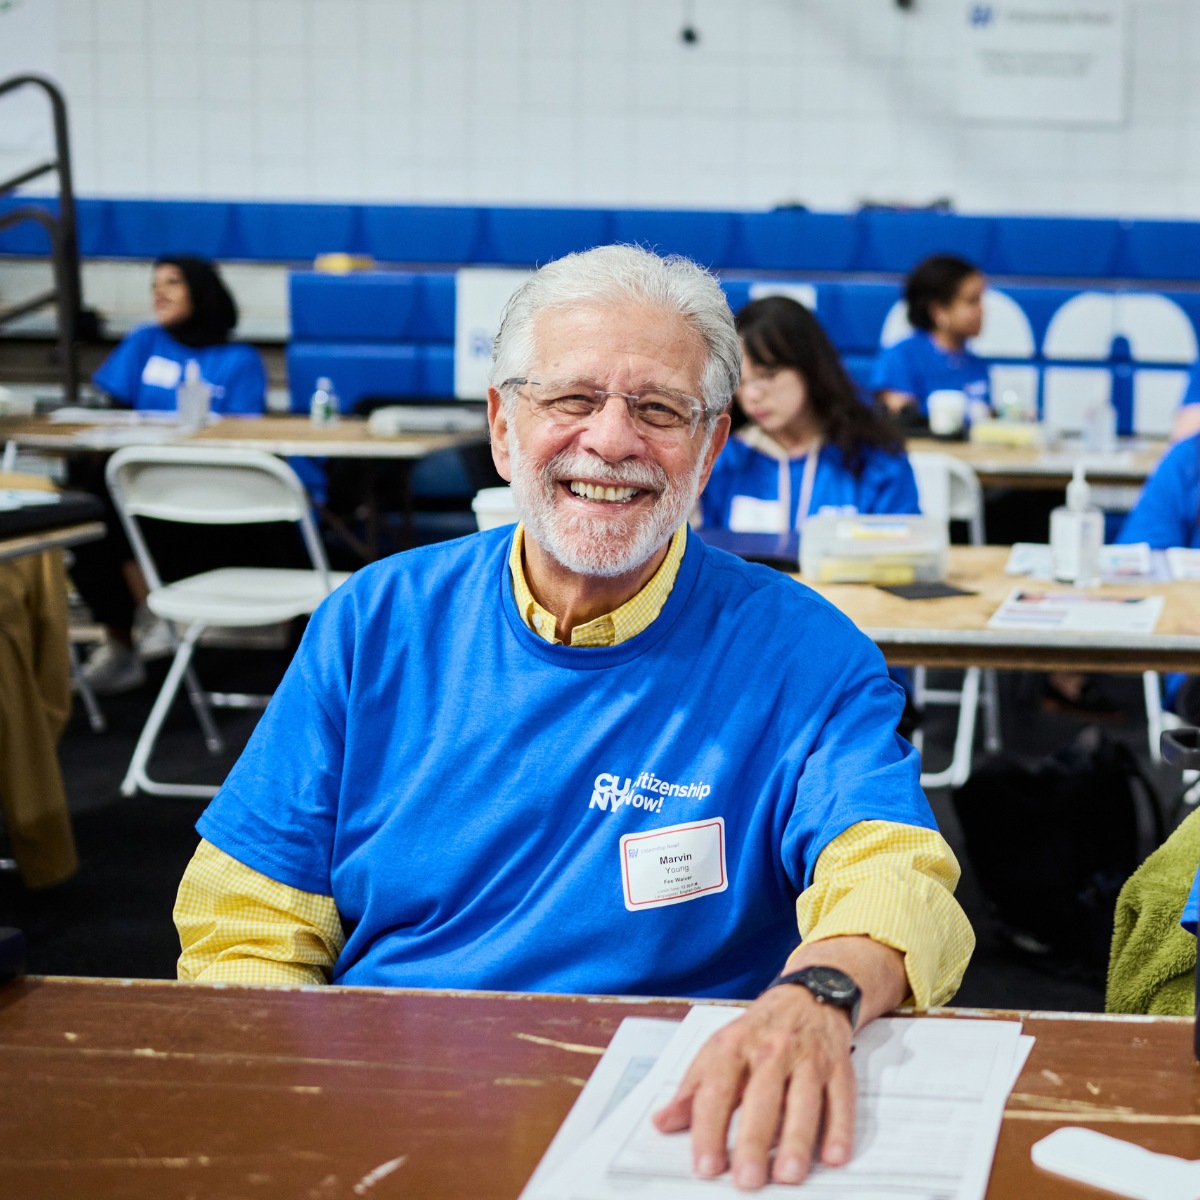 A CUNY Citizenship Now! volunteer sits at a table during the citizenship drive.